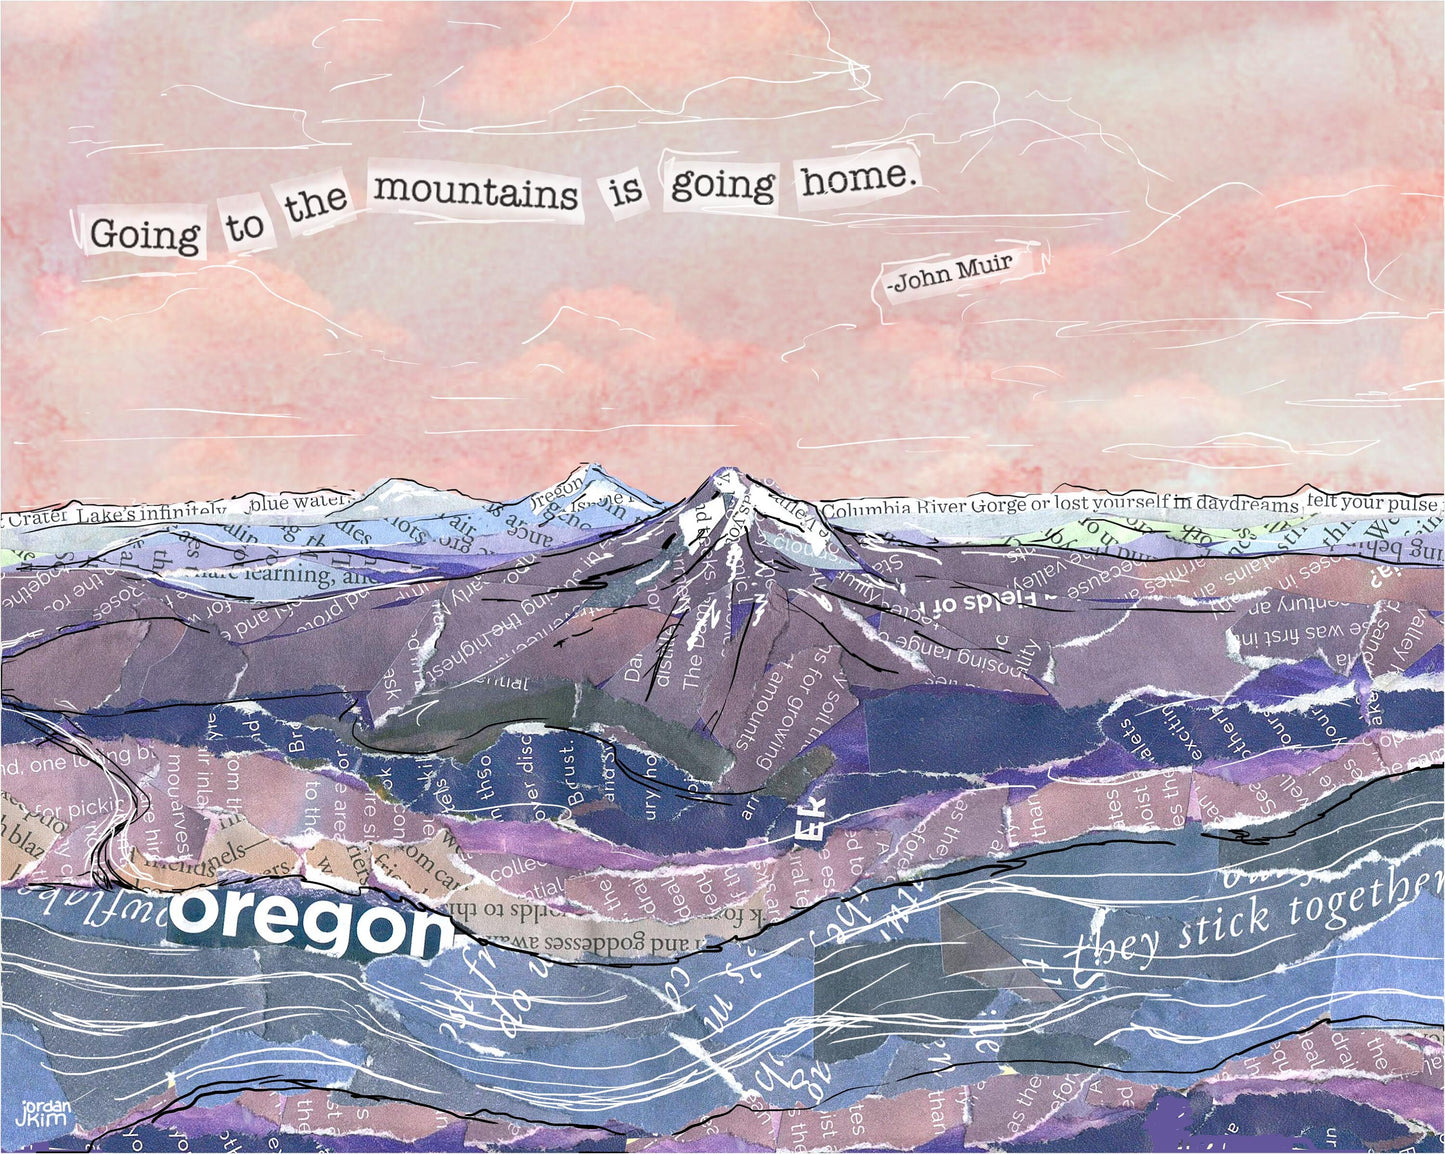 Greeting Card of the Oregon Cascade Mountains - John Muir quote - Order a Custom Design for Your Home Town! - Blank Inside